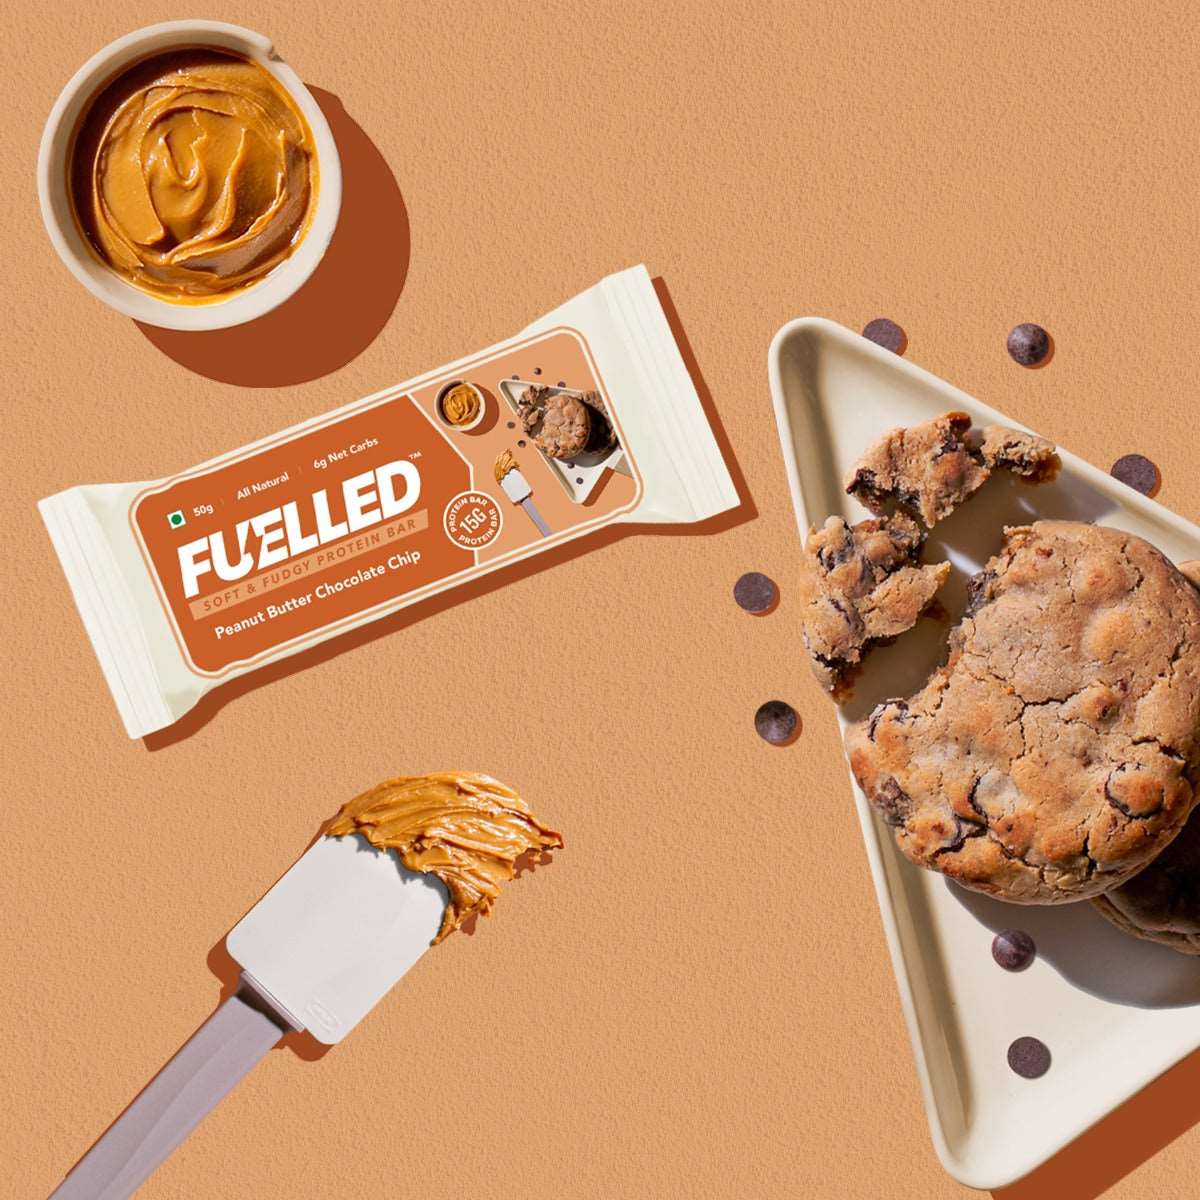 Fuelled Nutrition 15g Protein Bar | Peanut Butter Chocolate Chip Flavor | Delicious, Soft, and Fudgy Low Carb Protein Bars, No Preservatives, 100% Veg, No Added Sugar | 300gm (Pack of 6, 50gm each) Wemy Store